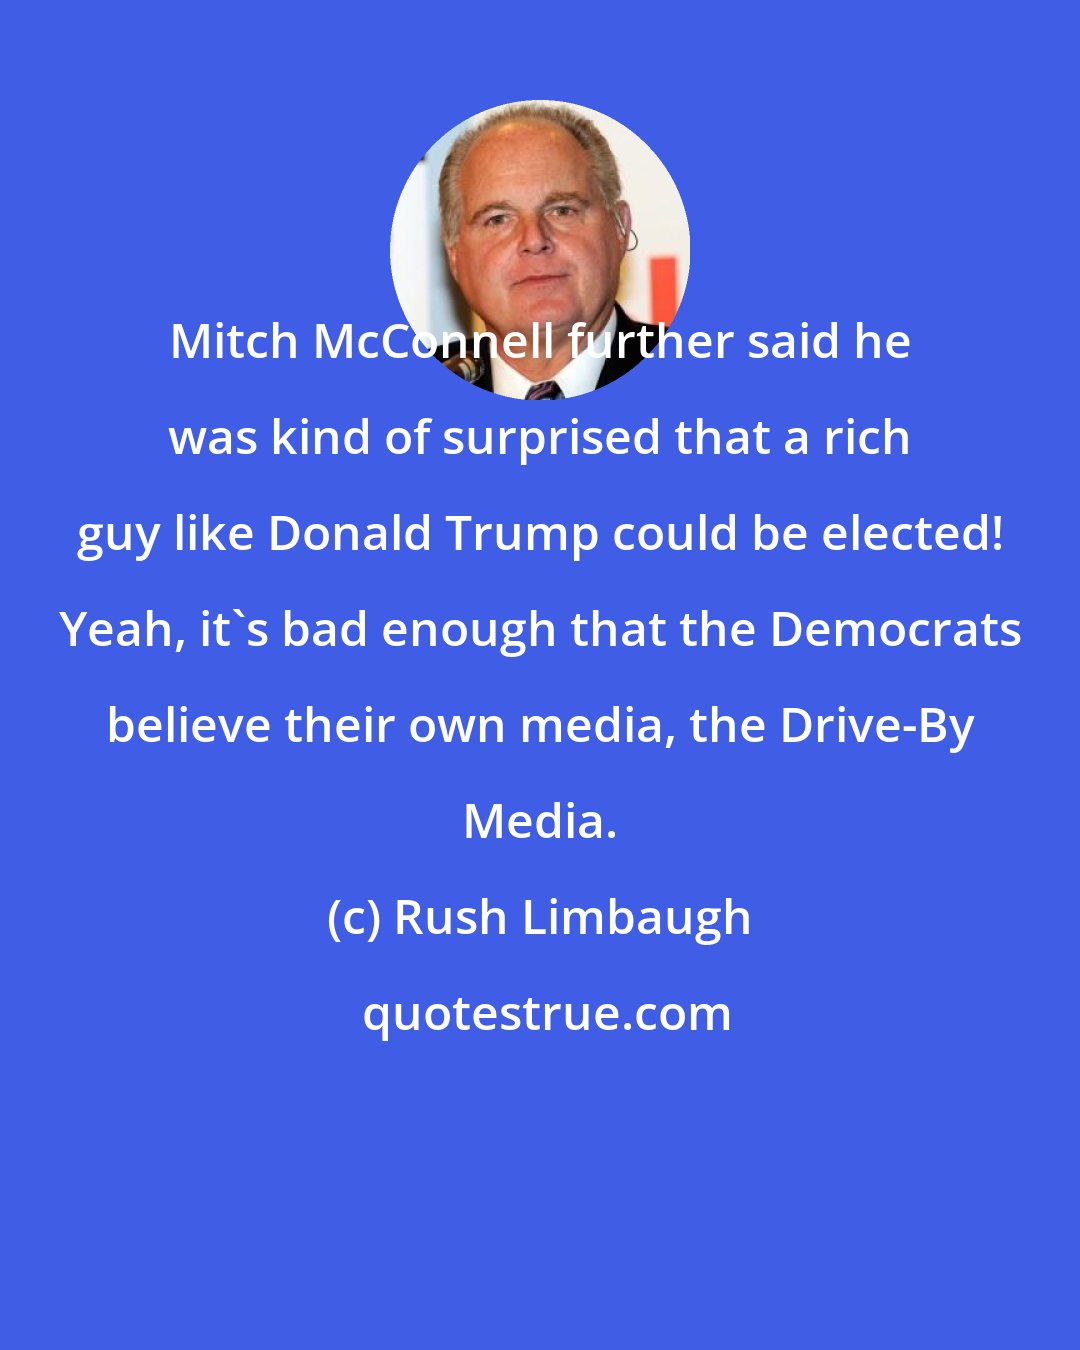 Rush Limbaugh: Mitch McConnell further said he was kind of surprised that a rich guy like Donald Trump could be elected! Yeah, it's bad enough that the Democrats believe their own media, the Drive-By Media.